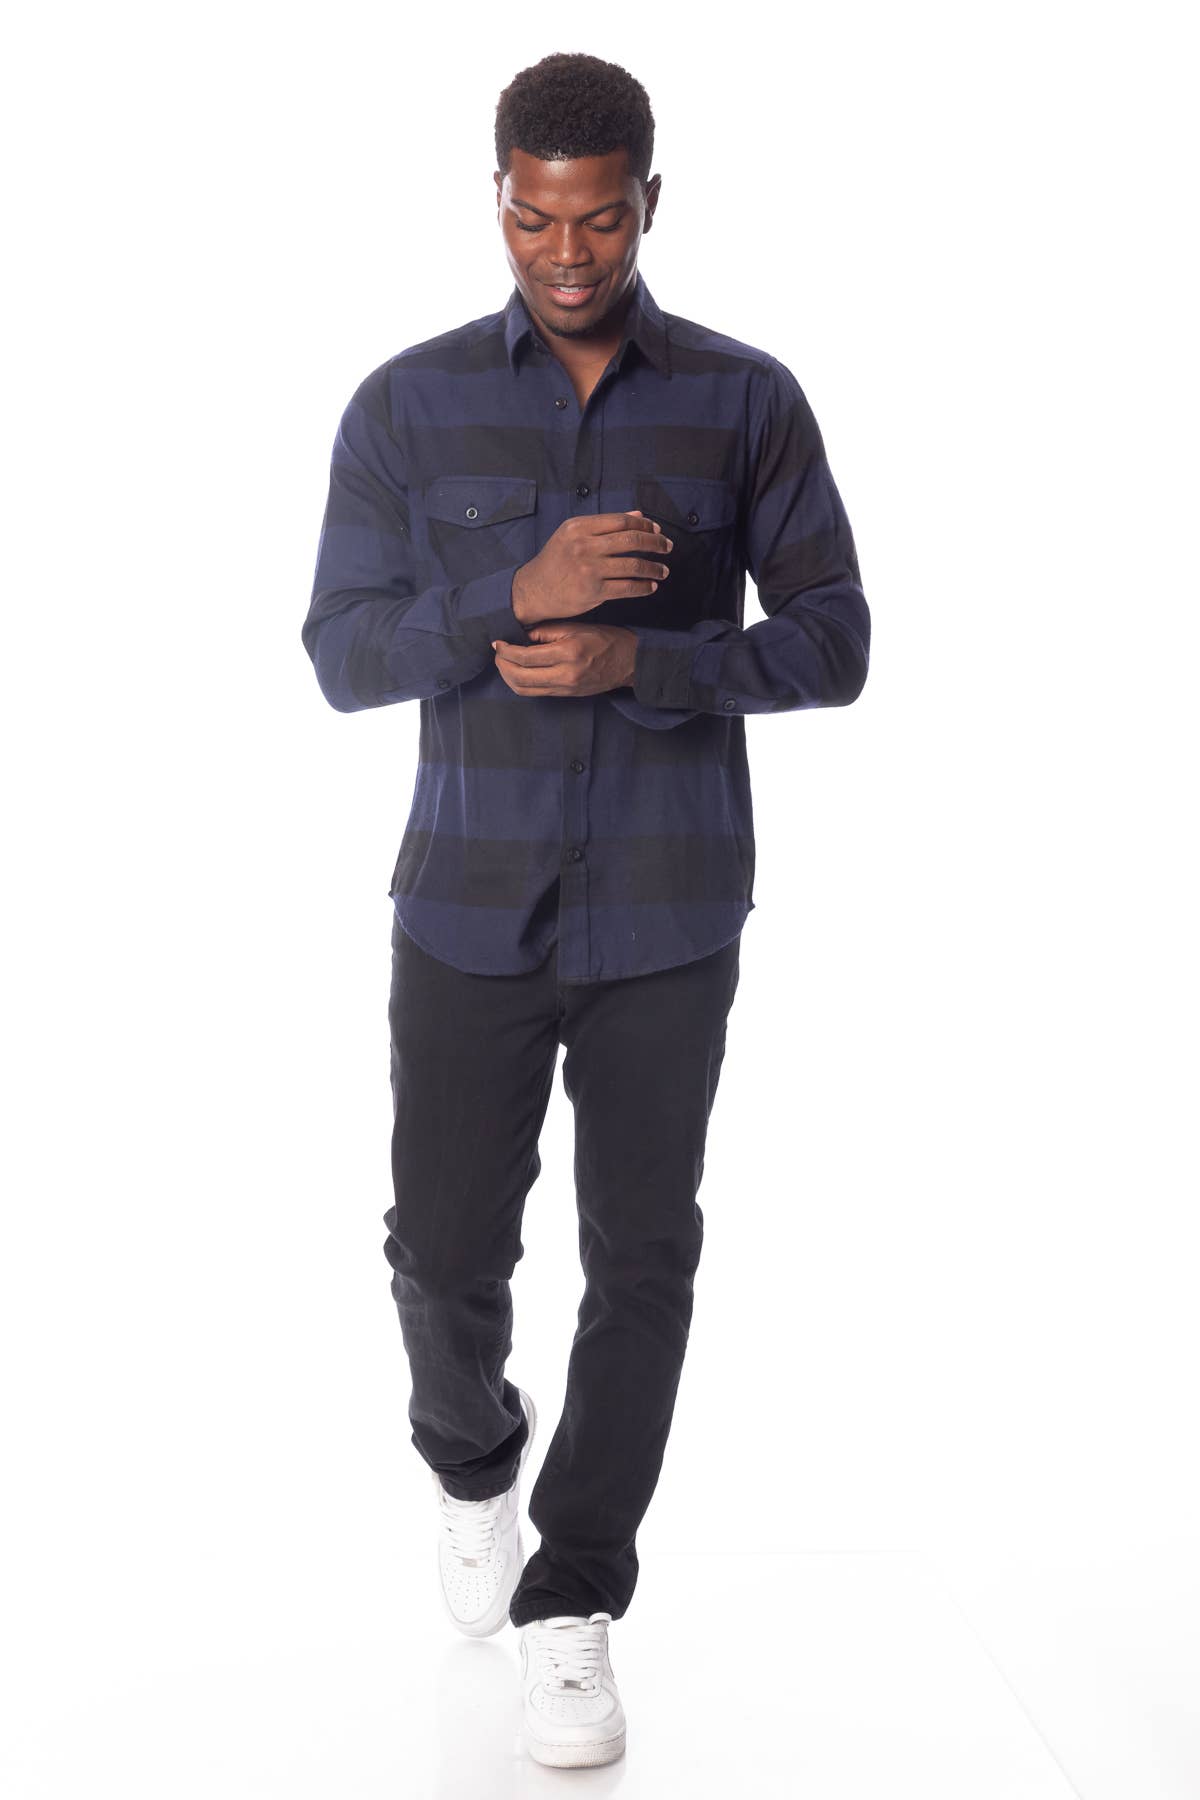 male model wearing a blue & black flannel shirt and black jeans